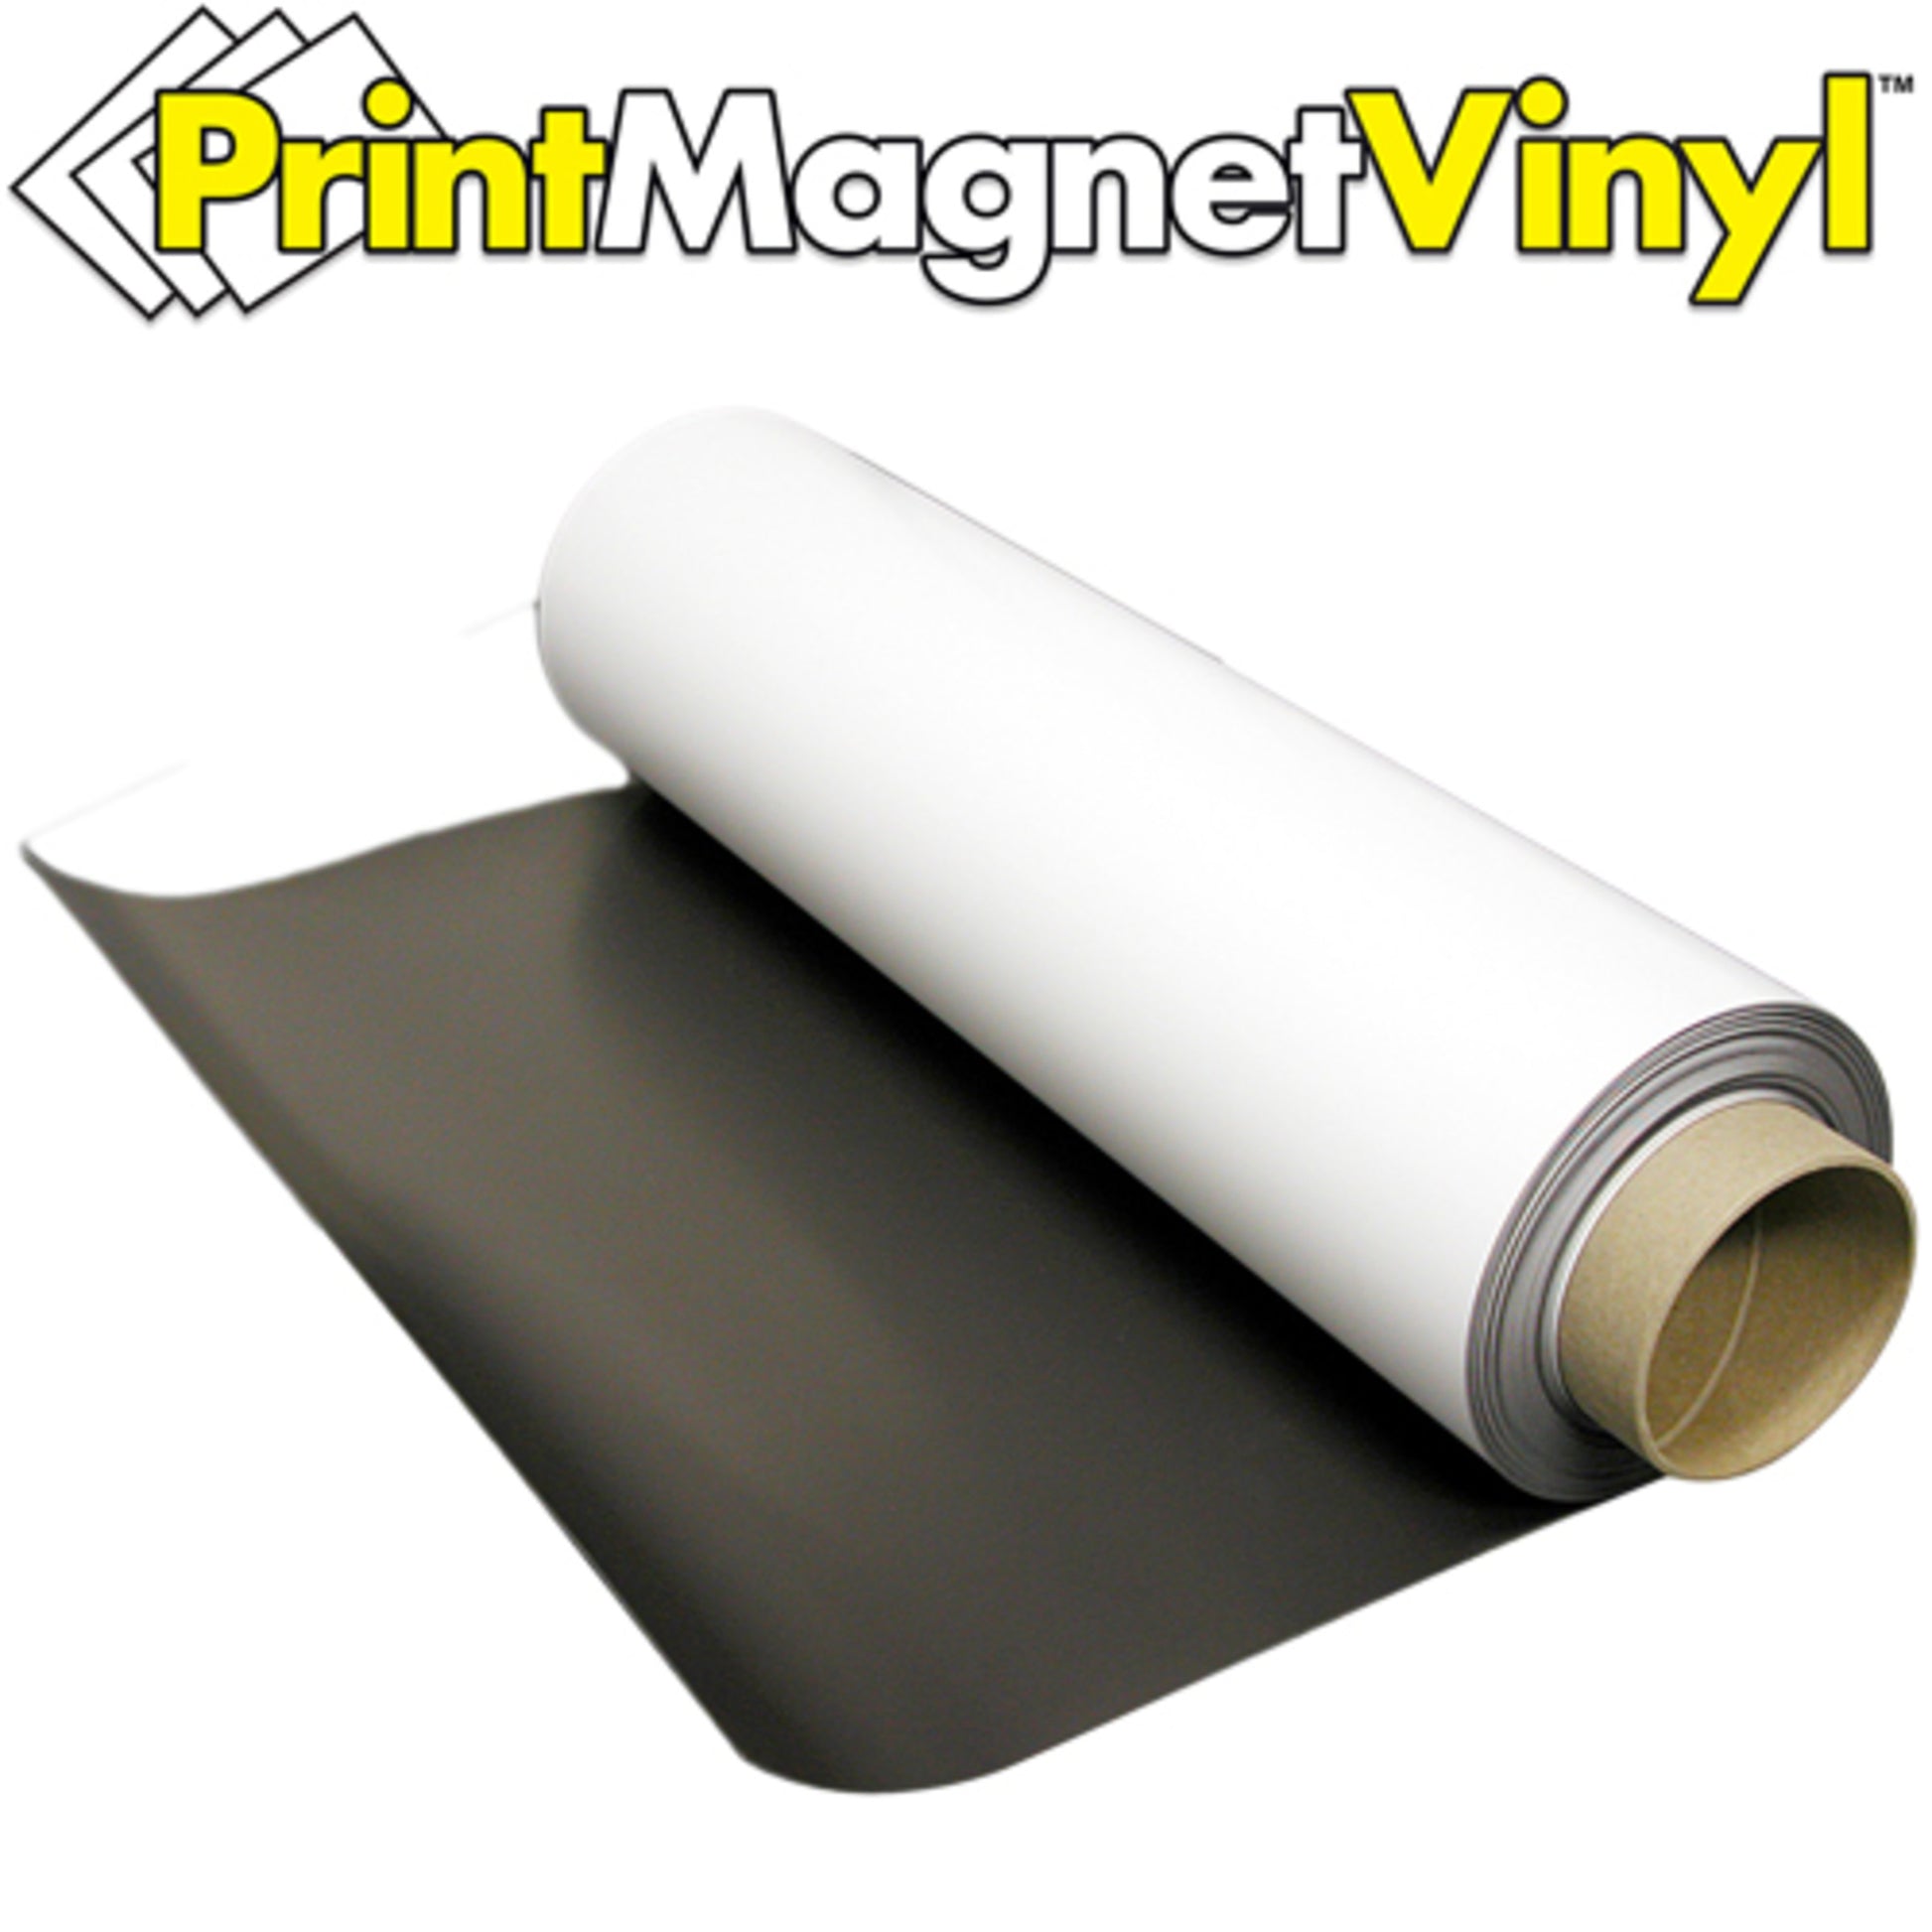 Load image into Gallery viewer, ZGN1530GW50 PrintMagnetVinyl™ Flexible Magnetic Sheet - In Use